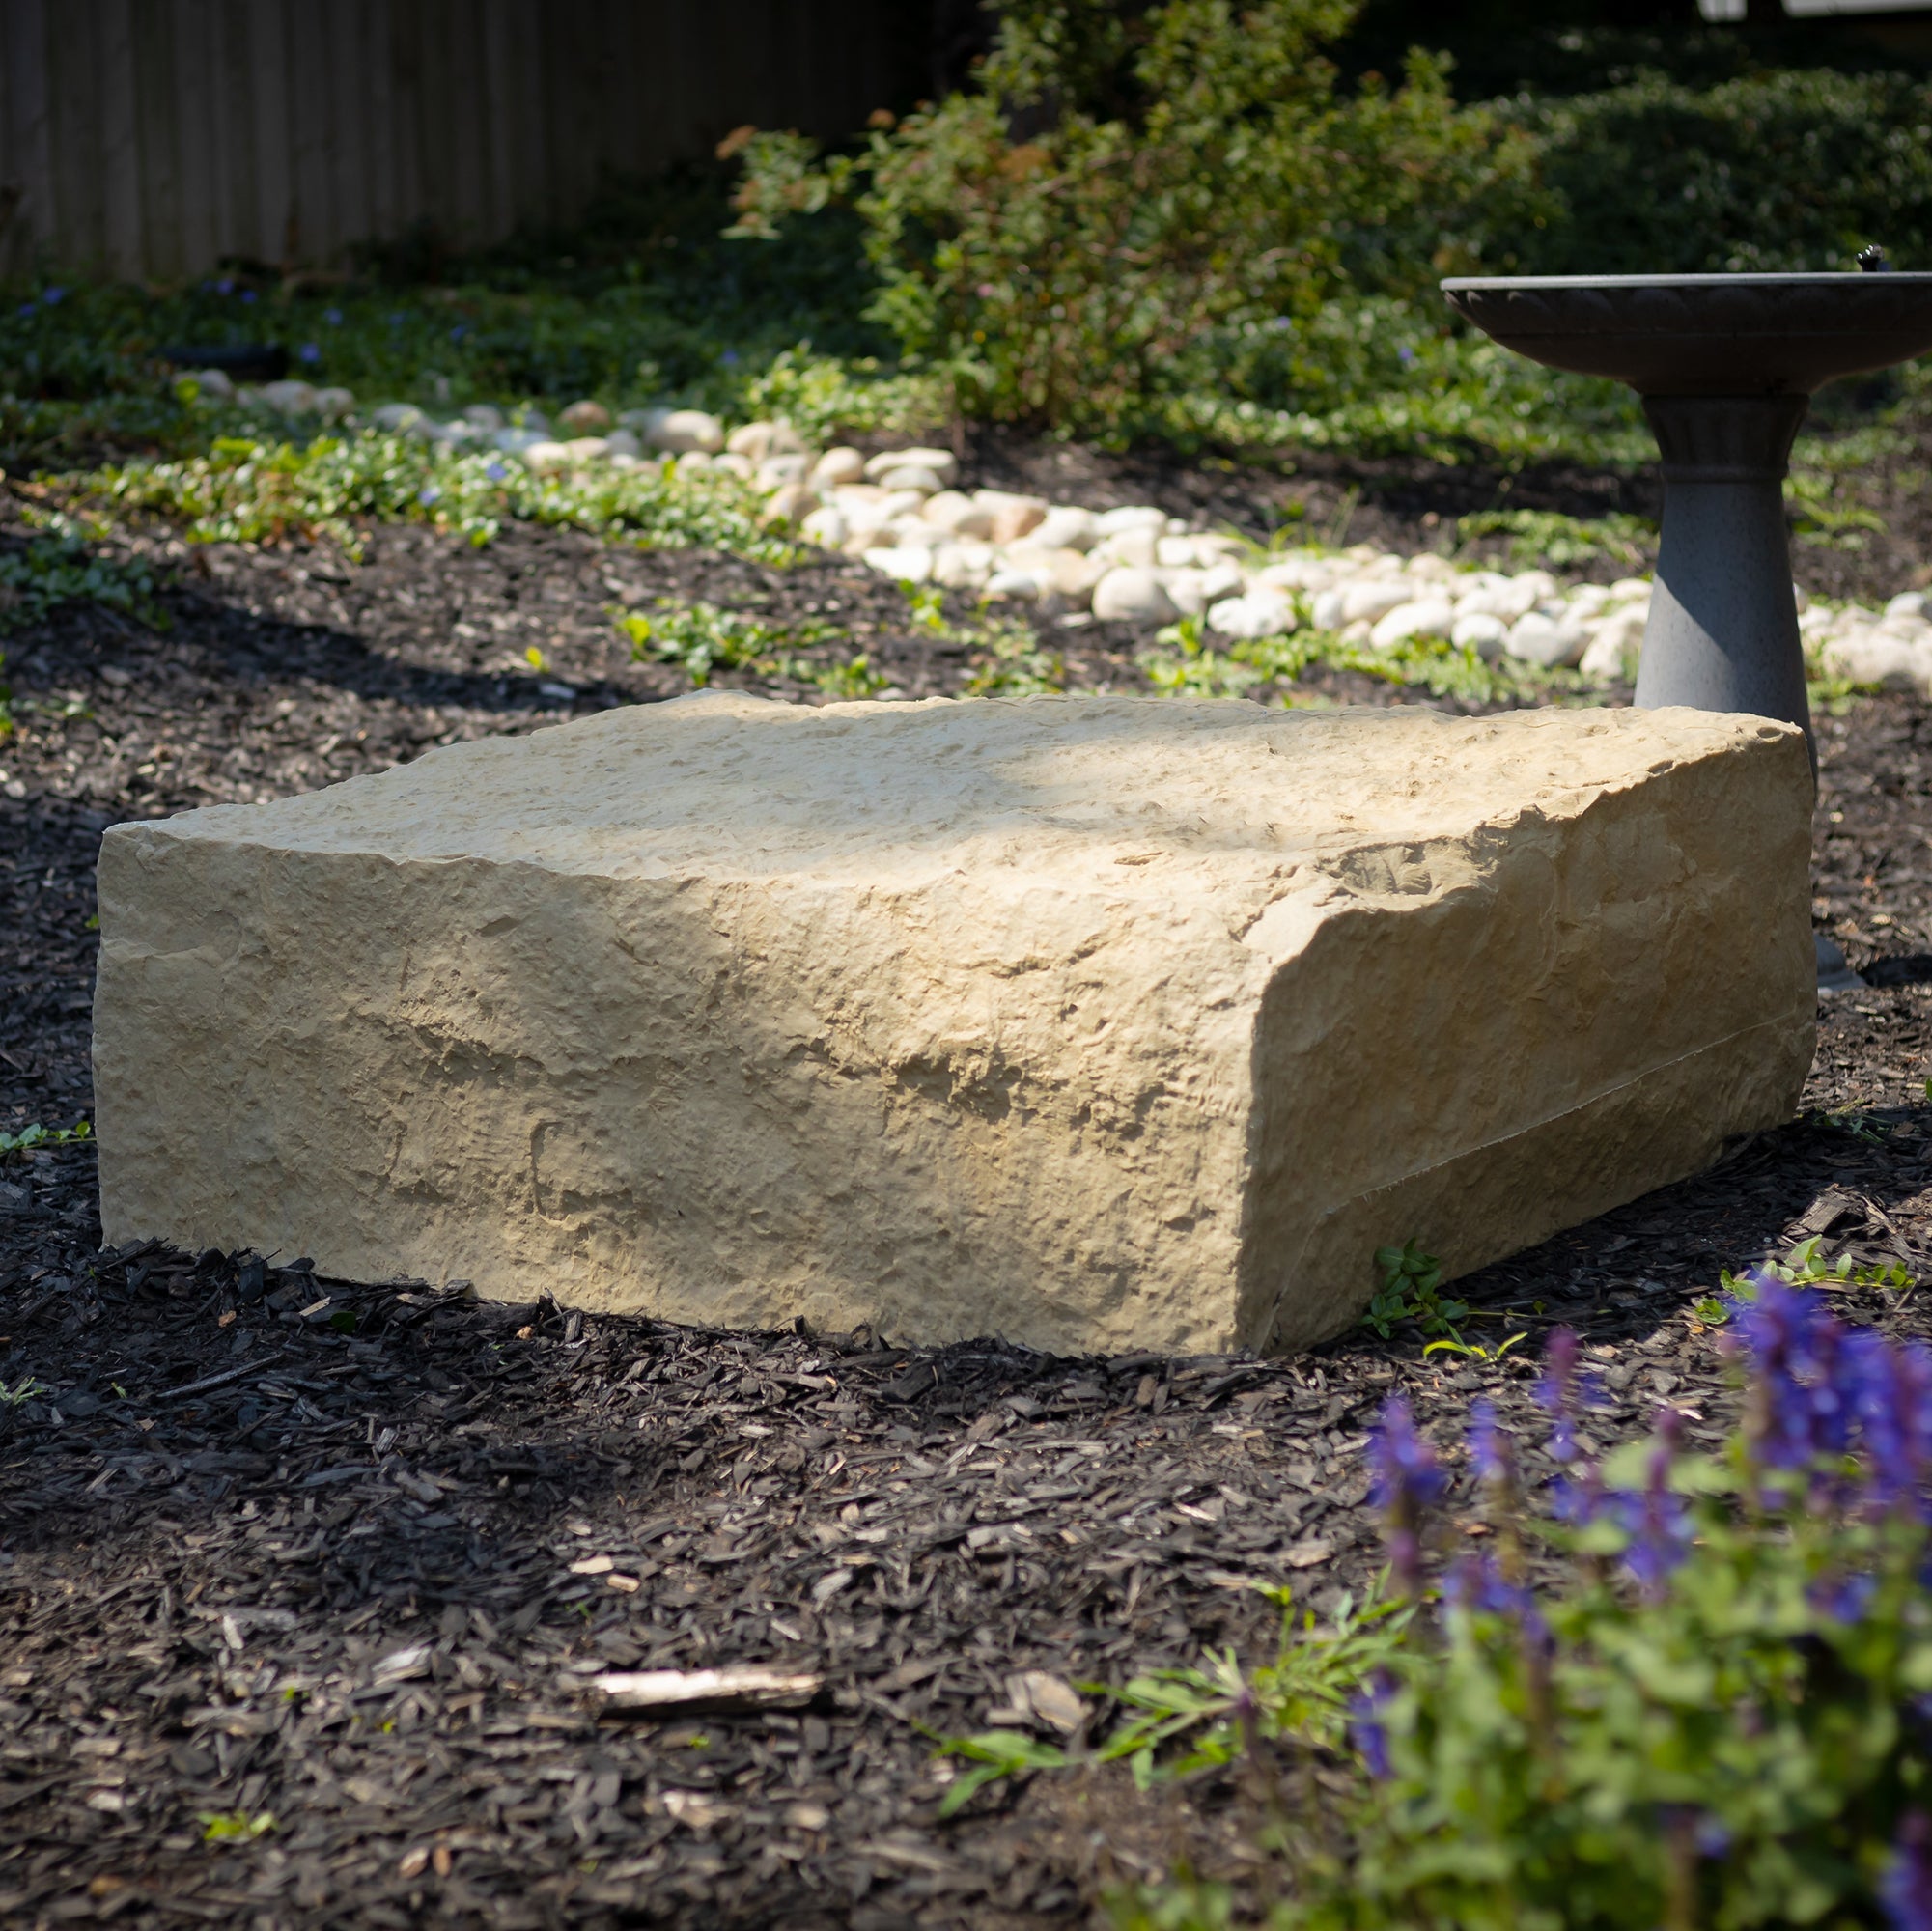 extra large landscape rock in sandstone on wood chips in a garden with bird bath